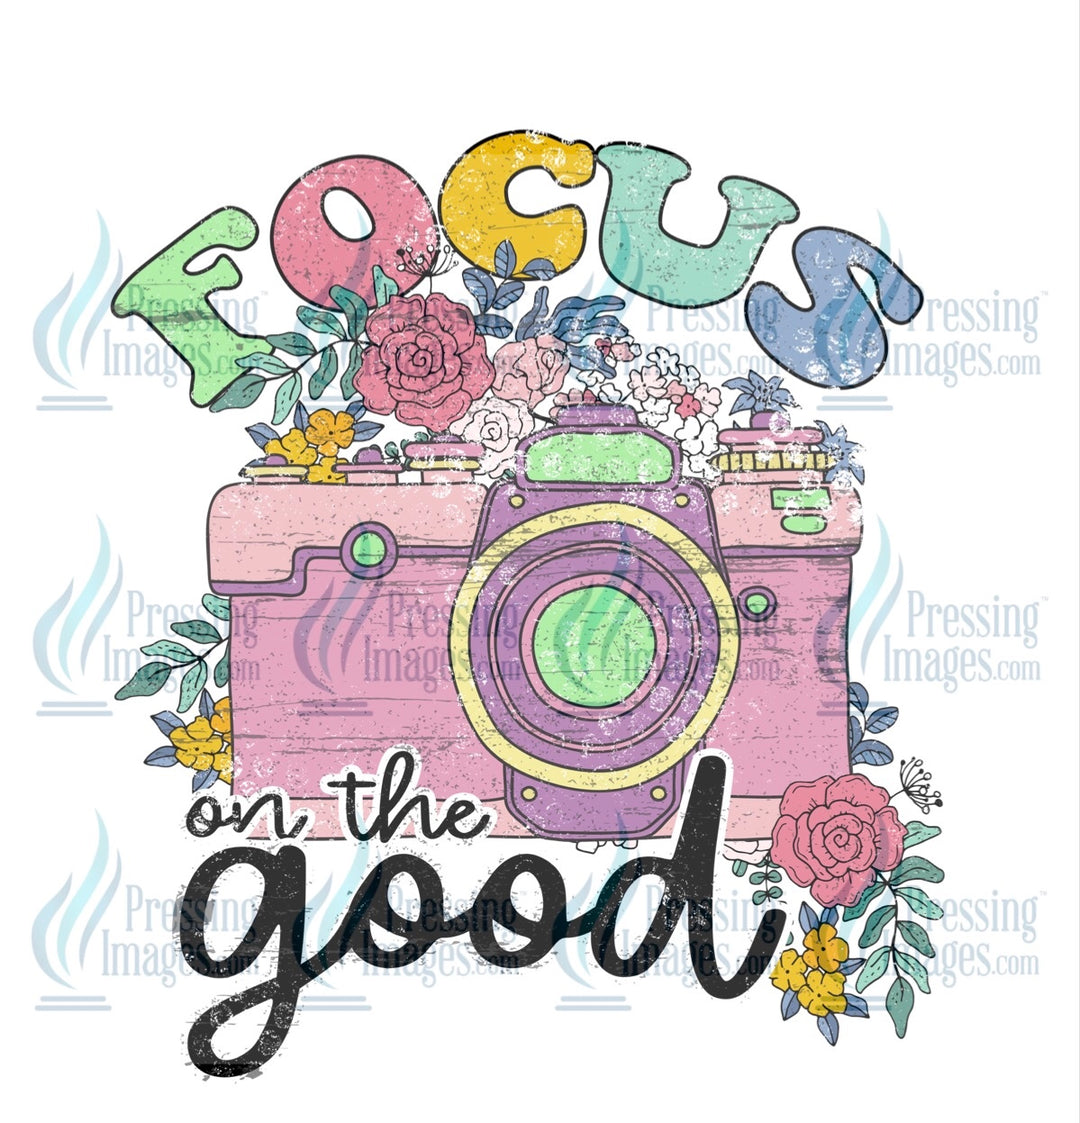 Decal 4123 Focus on the good